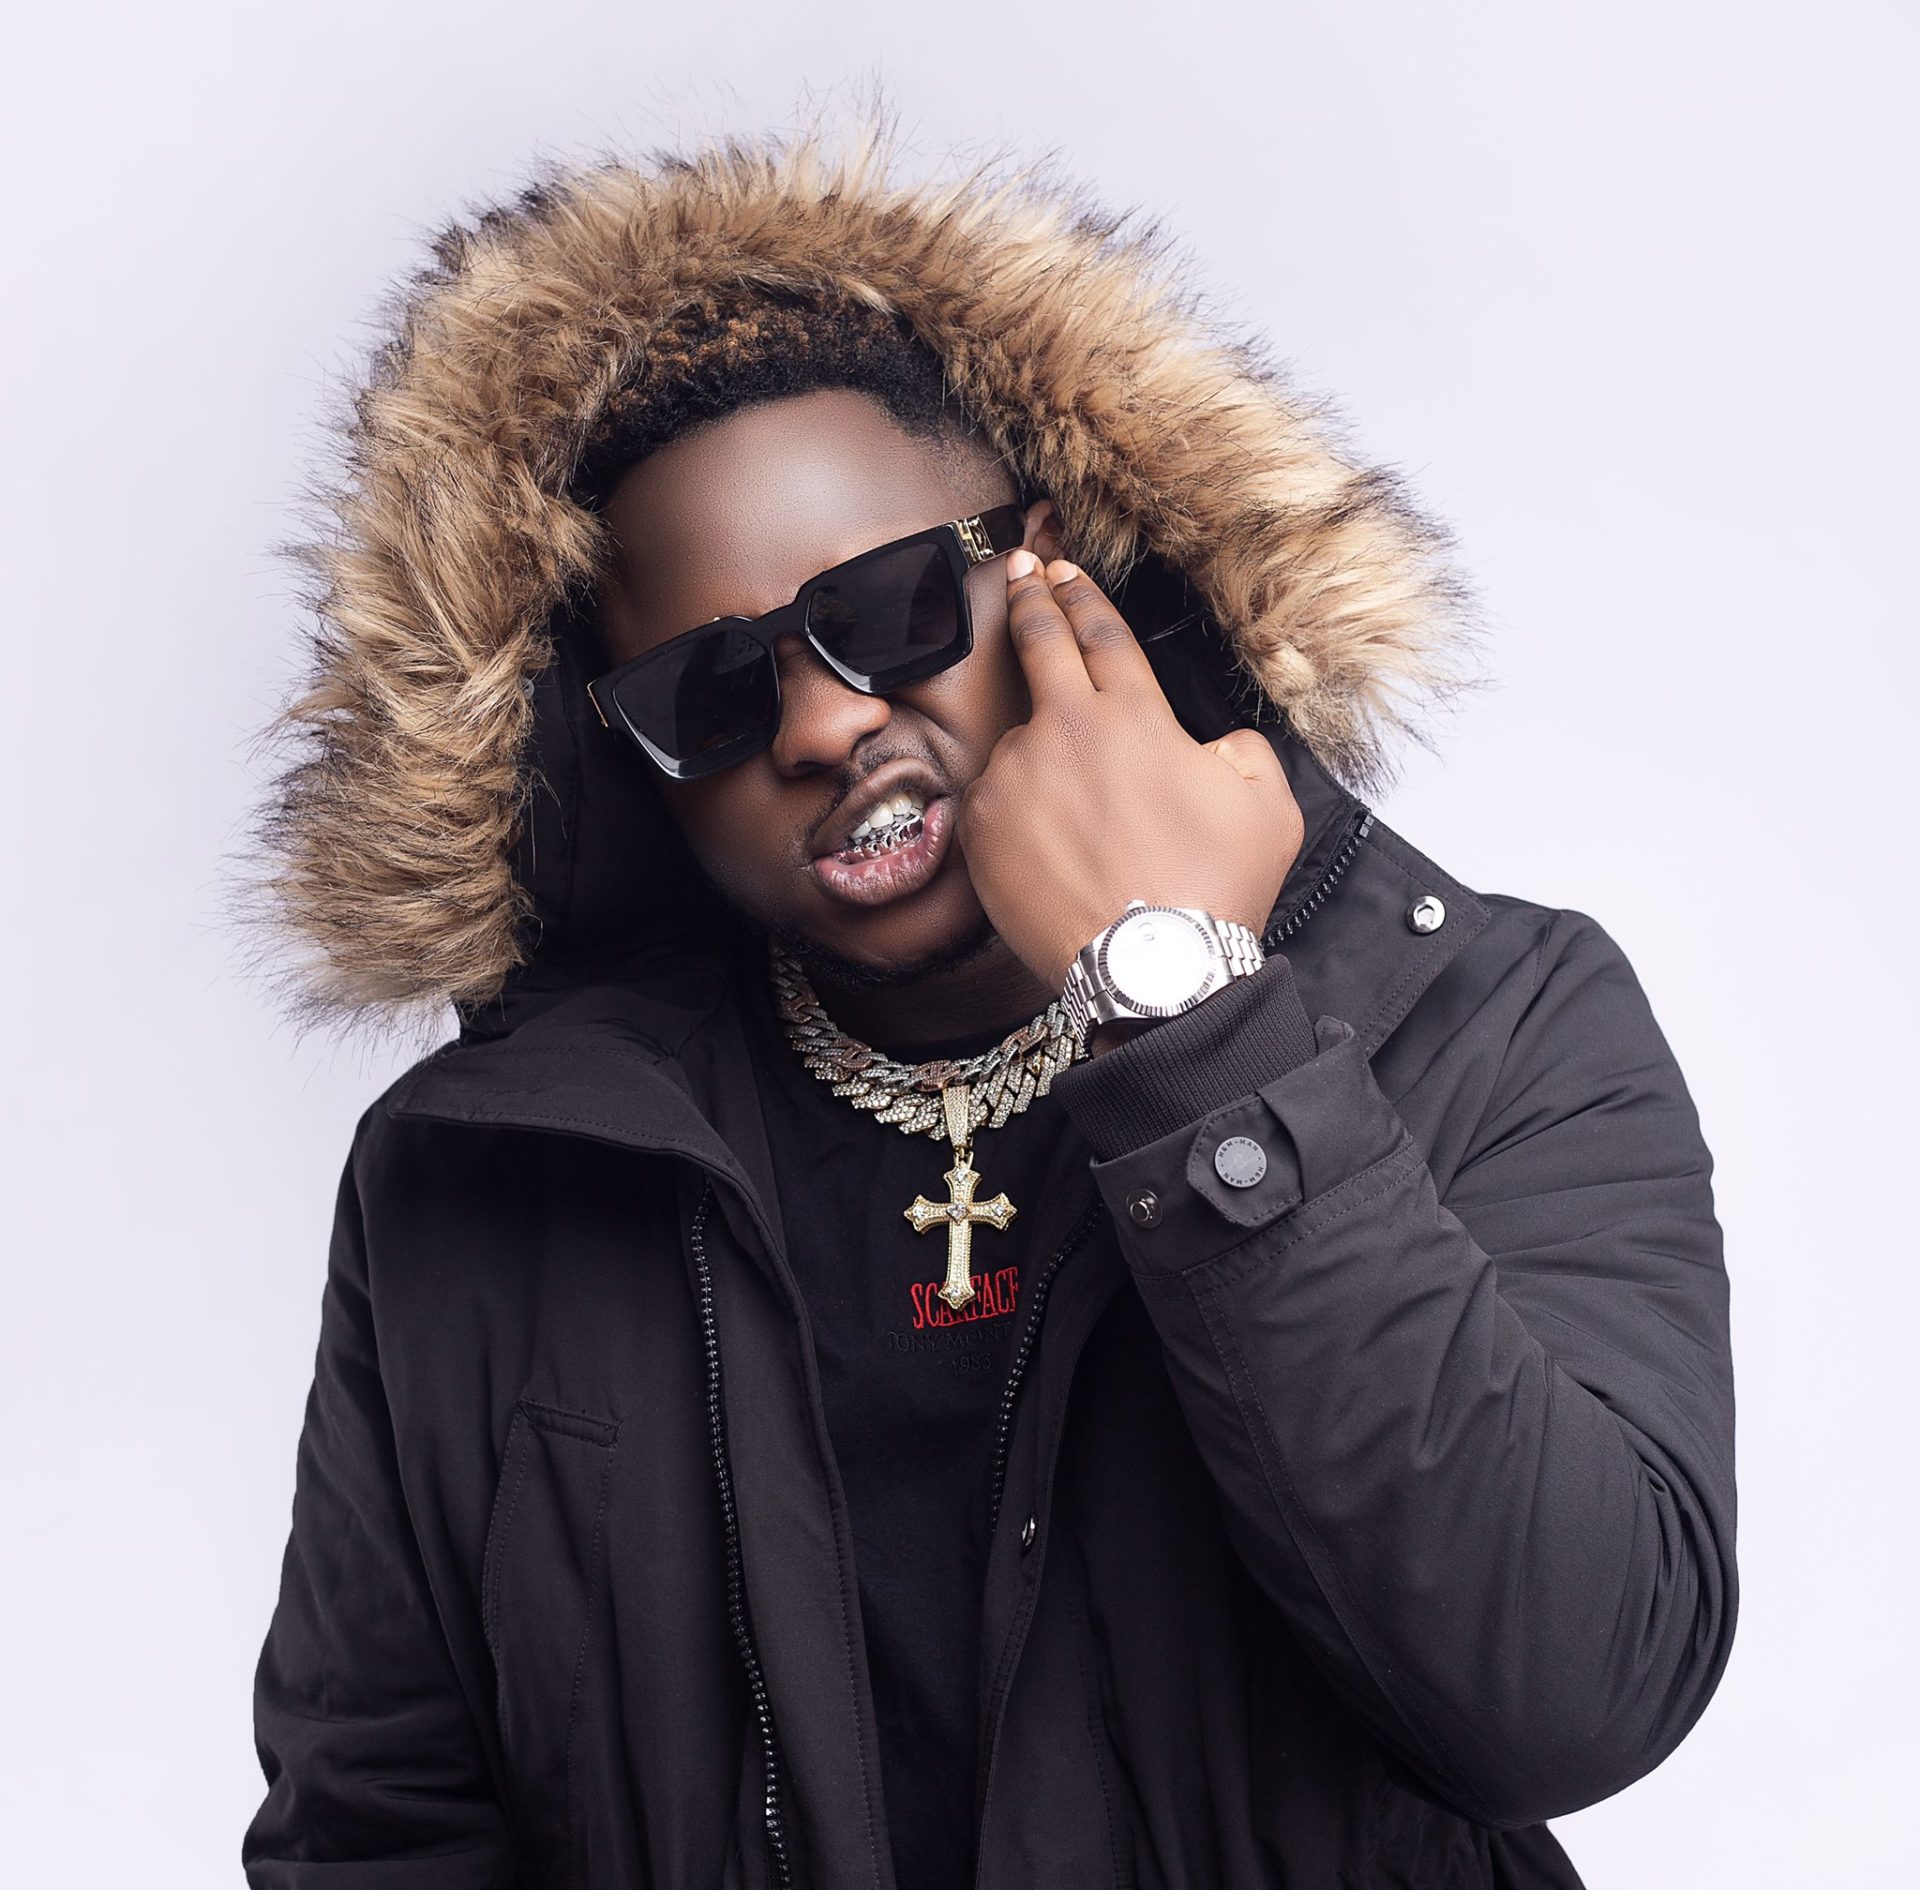 Remain Calm And Support MDK With Prayers – Medikal’s Management Issues Statement